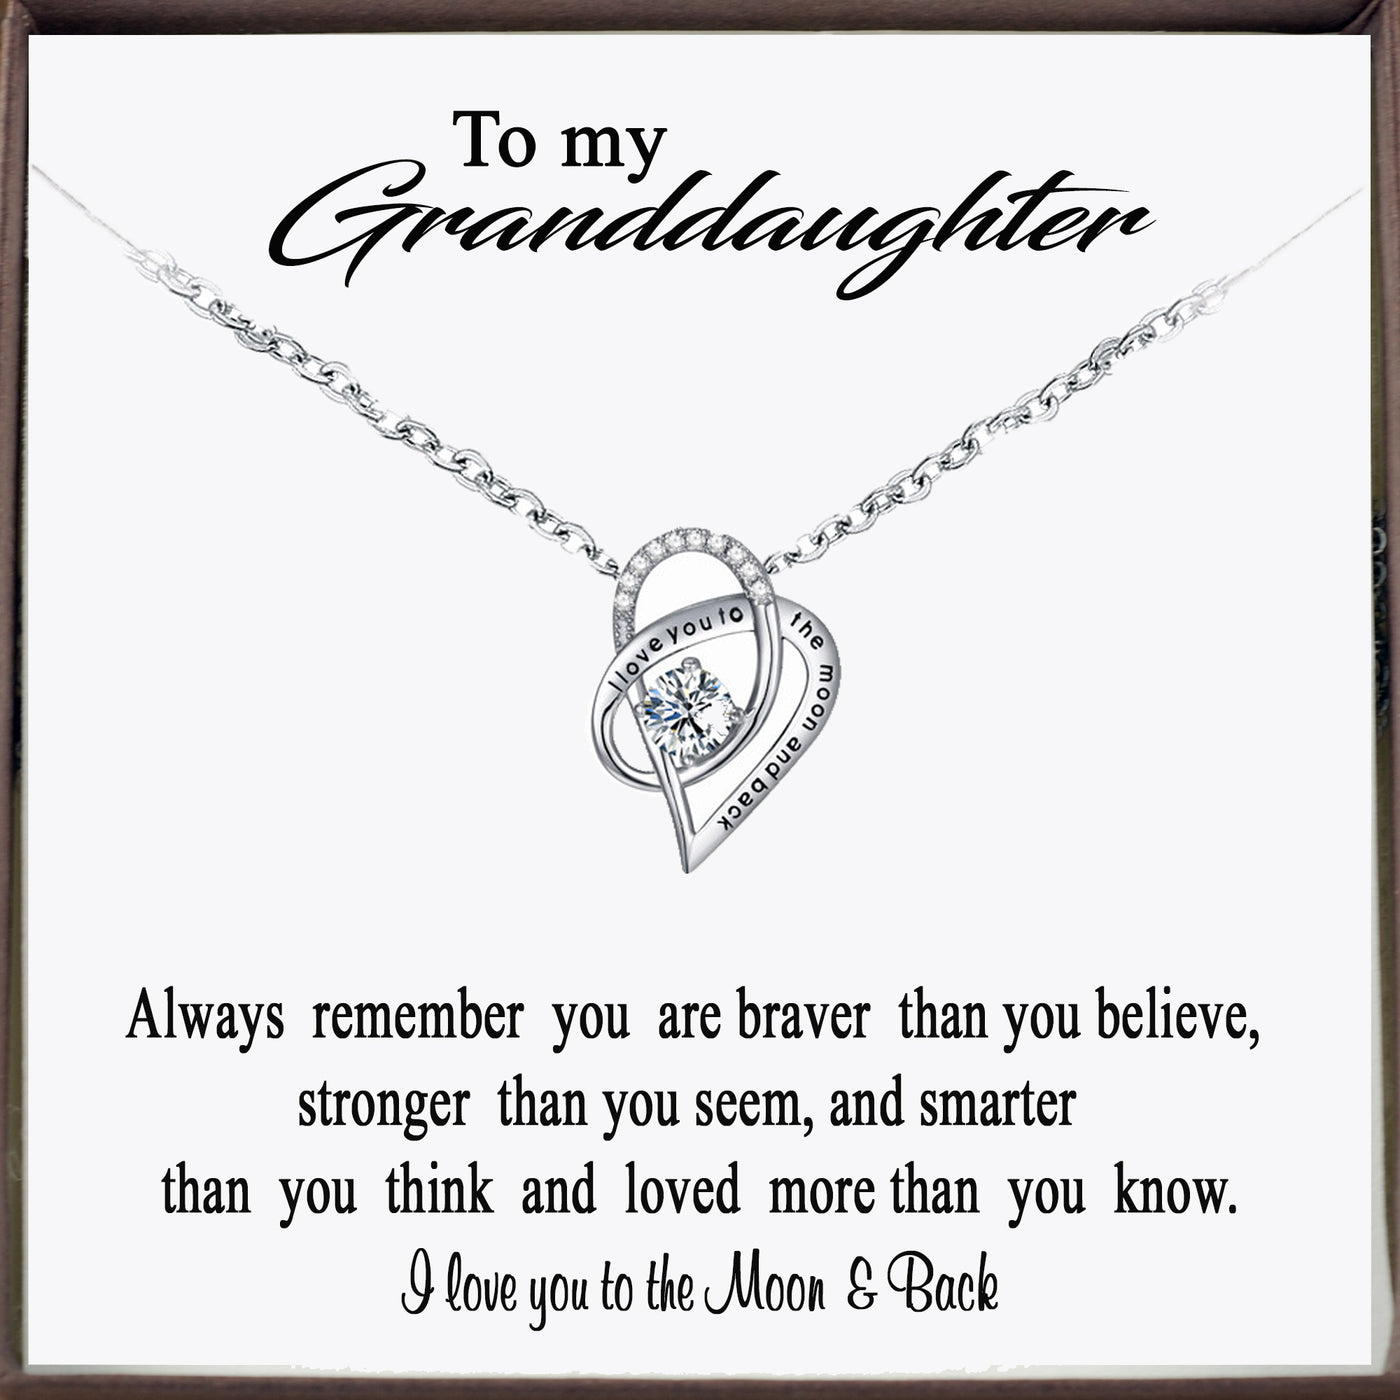 To my Granddaughter - I love you to the Moon & Back - Godfullness